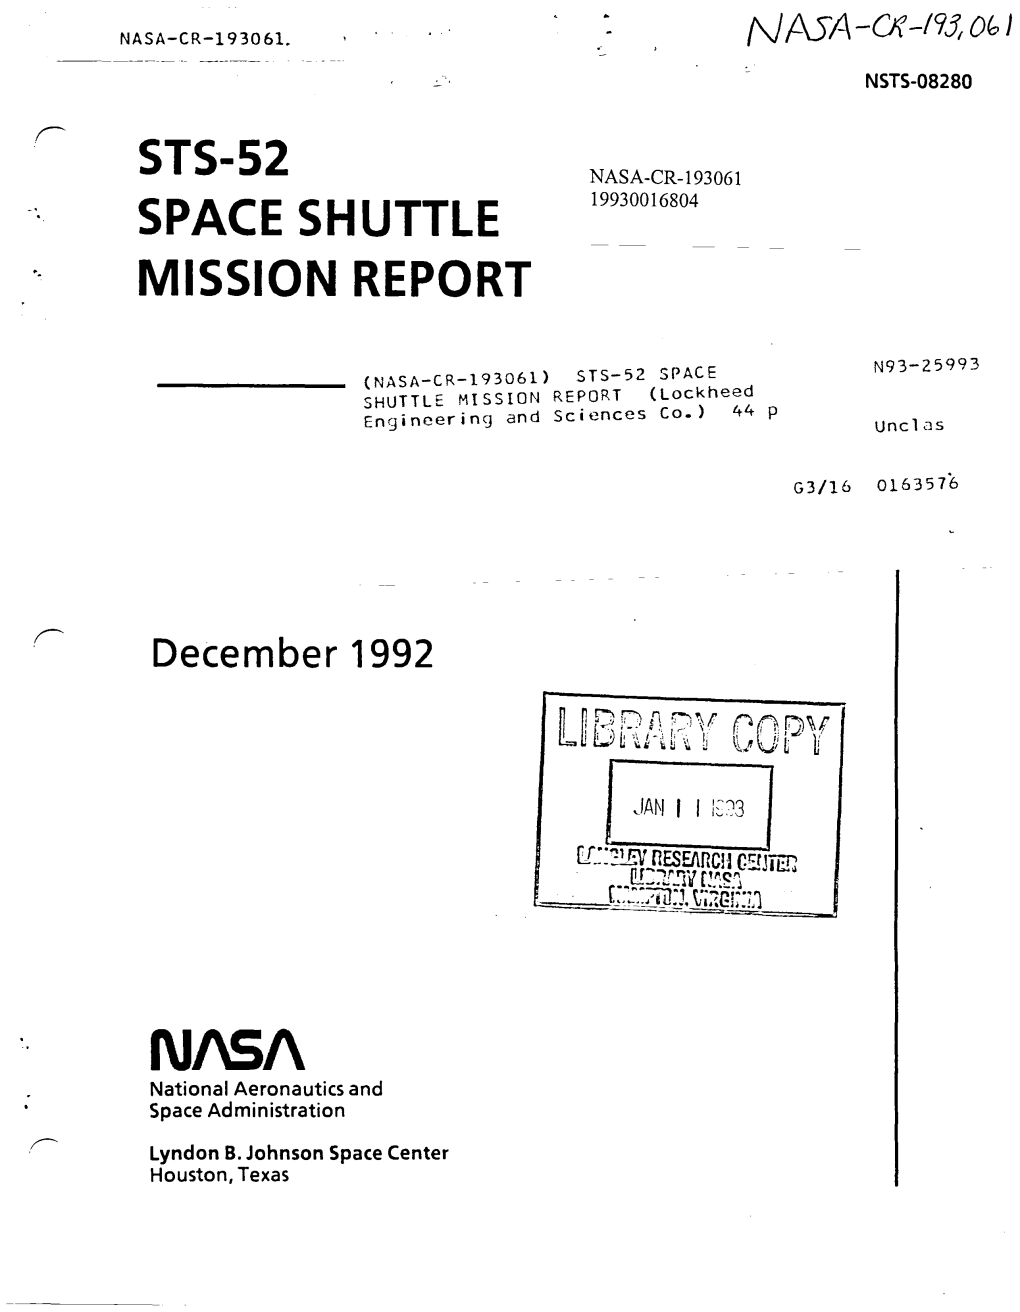 STS-52 SPACE SHUTTLE MISSION REPORT (Lockheed Engineering and Sciences Co.) 44 P Unclas